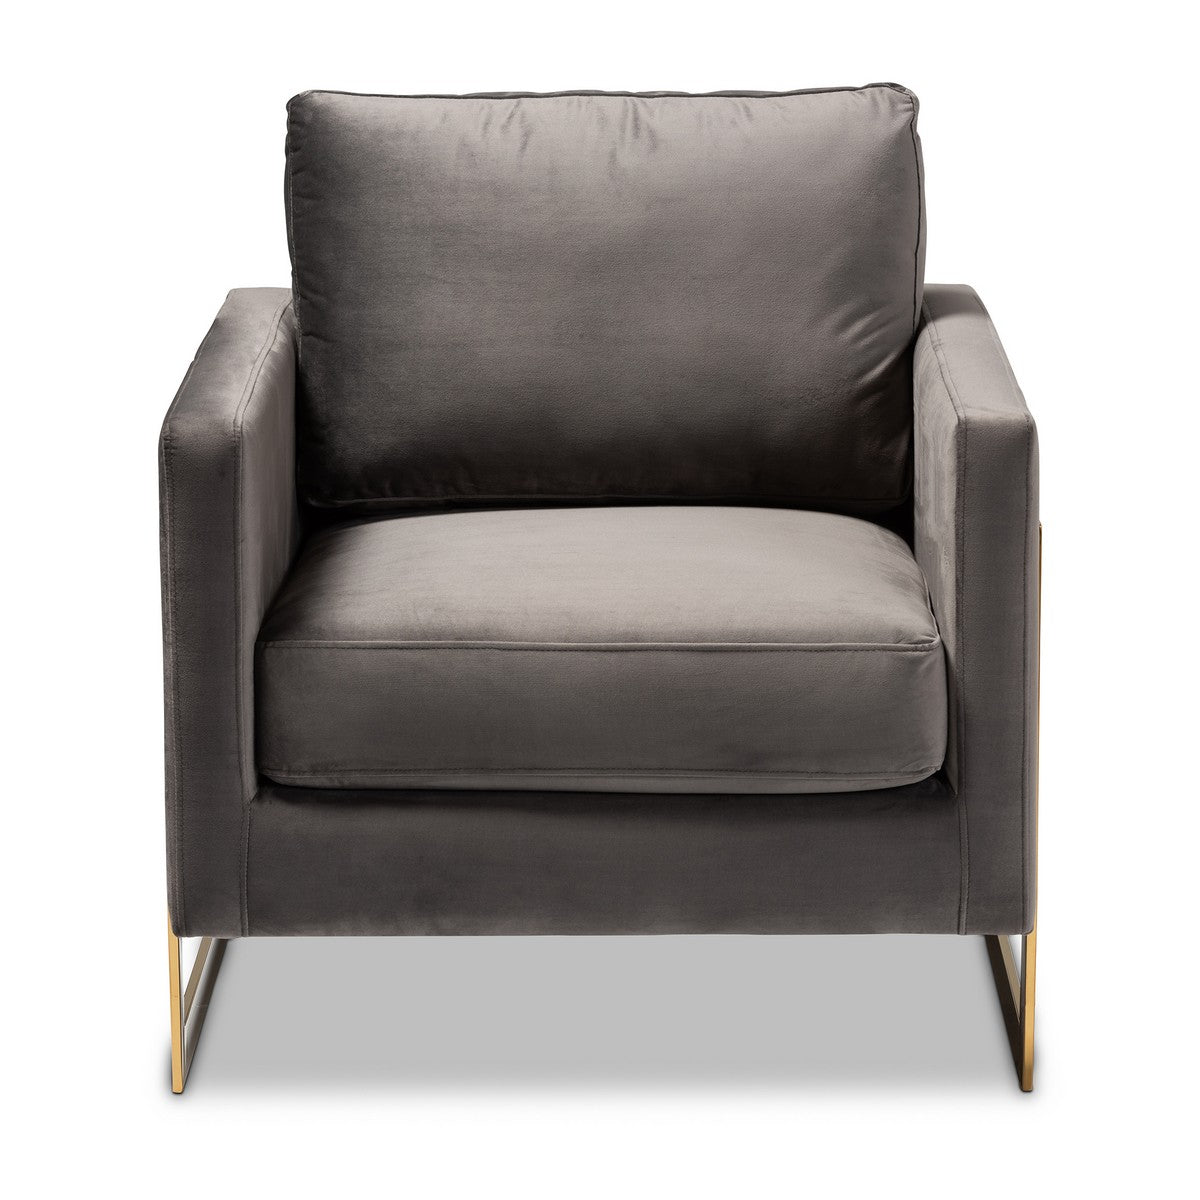 Baxton Studio Matteo Glam and Luxe Grey Velvet Fabric Upholstered Gold Finished Armchair Baxton Studio-chairs-Minimal And Modern - 1